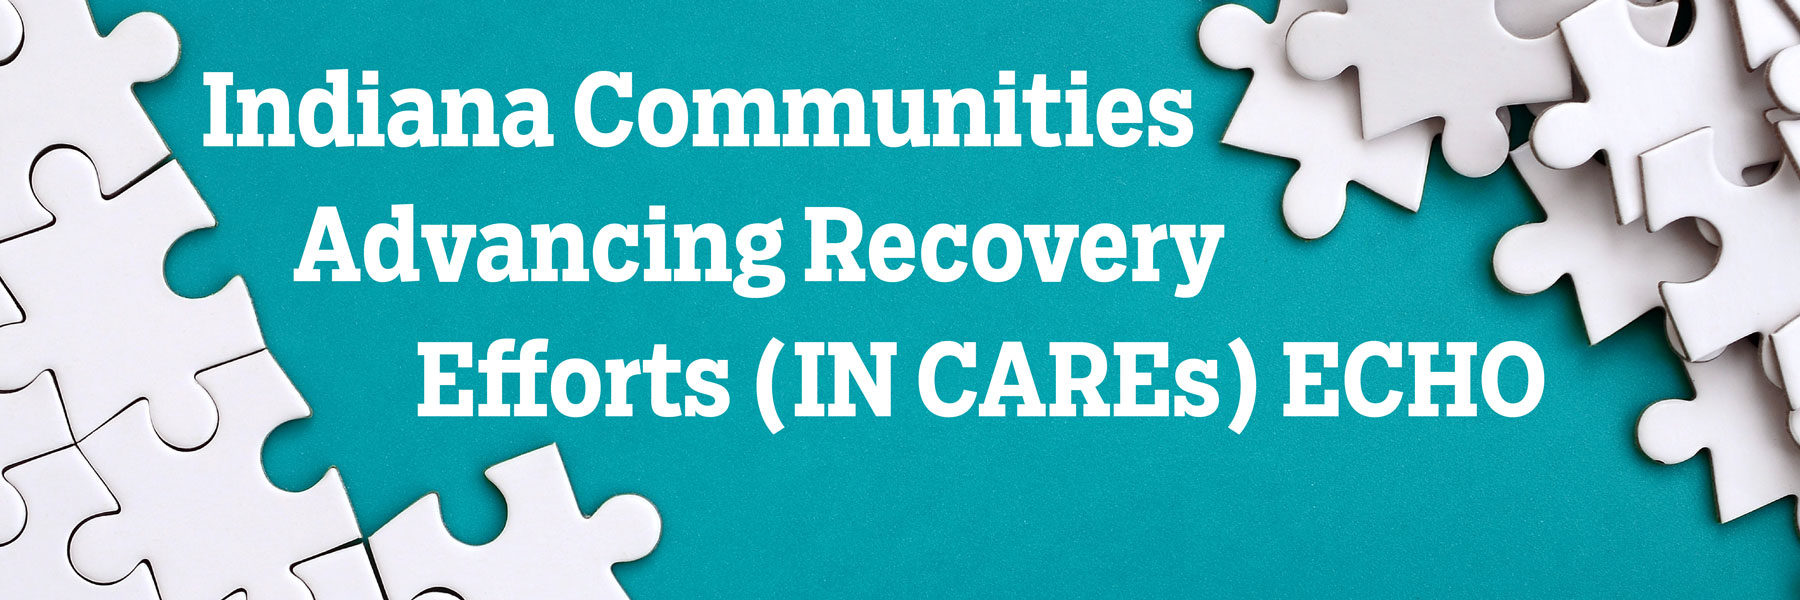 indiana communities advancing recovery efforts echo